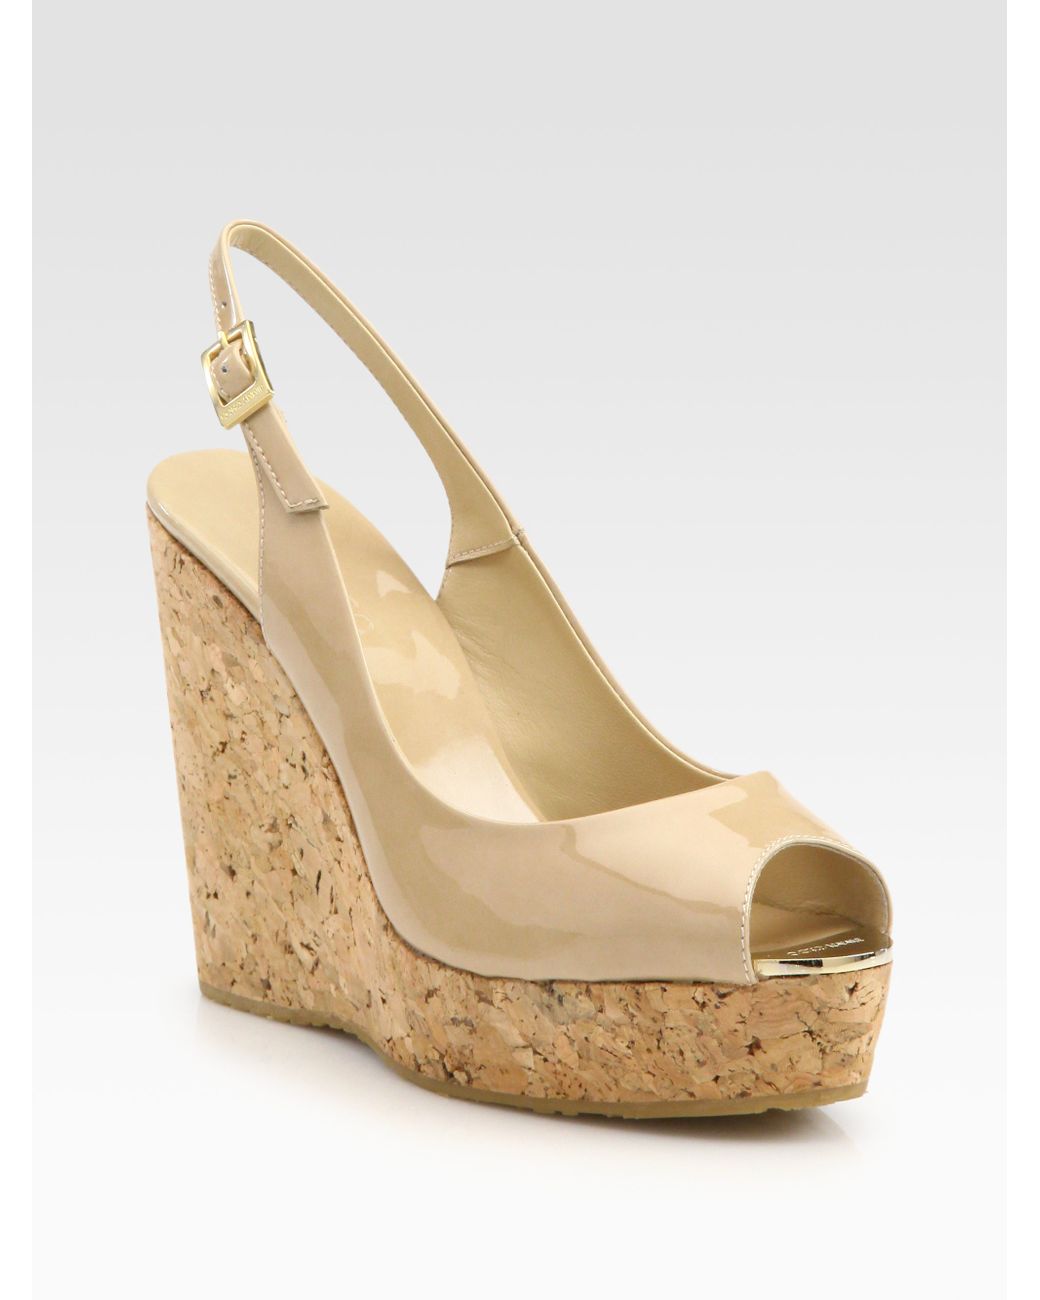 Jimmy Choo Prova Patent Leather Cork Wedge Sandals in Natural | Lyst